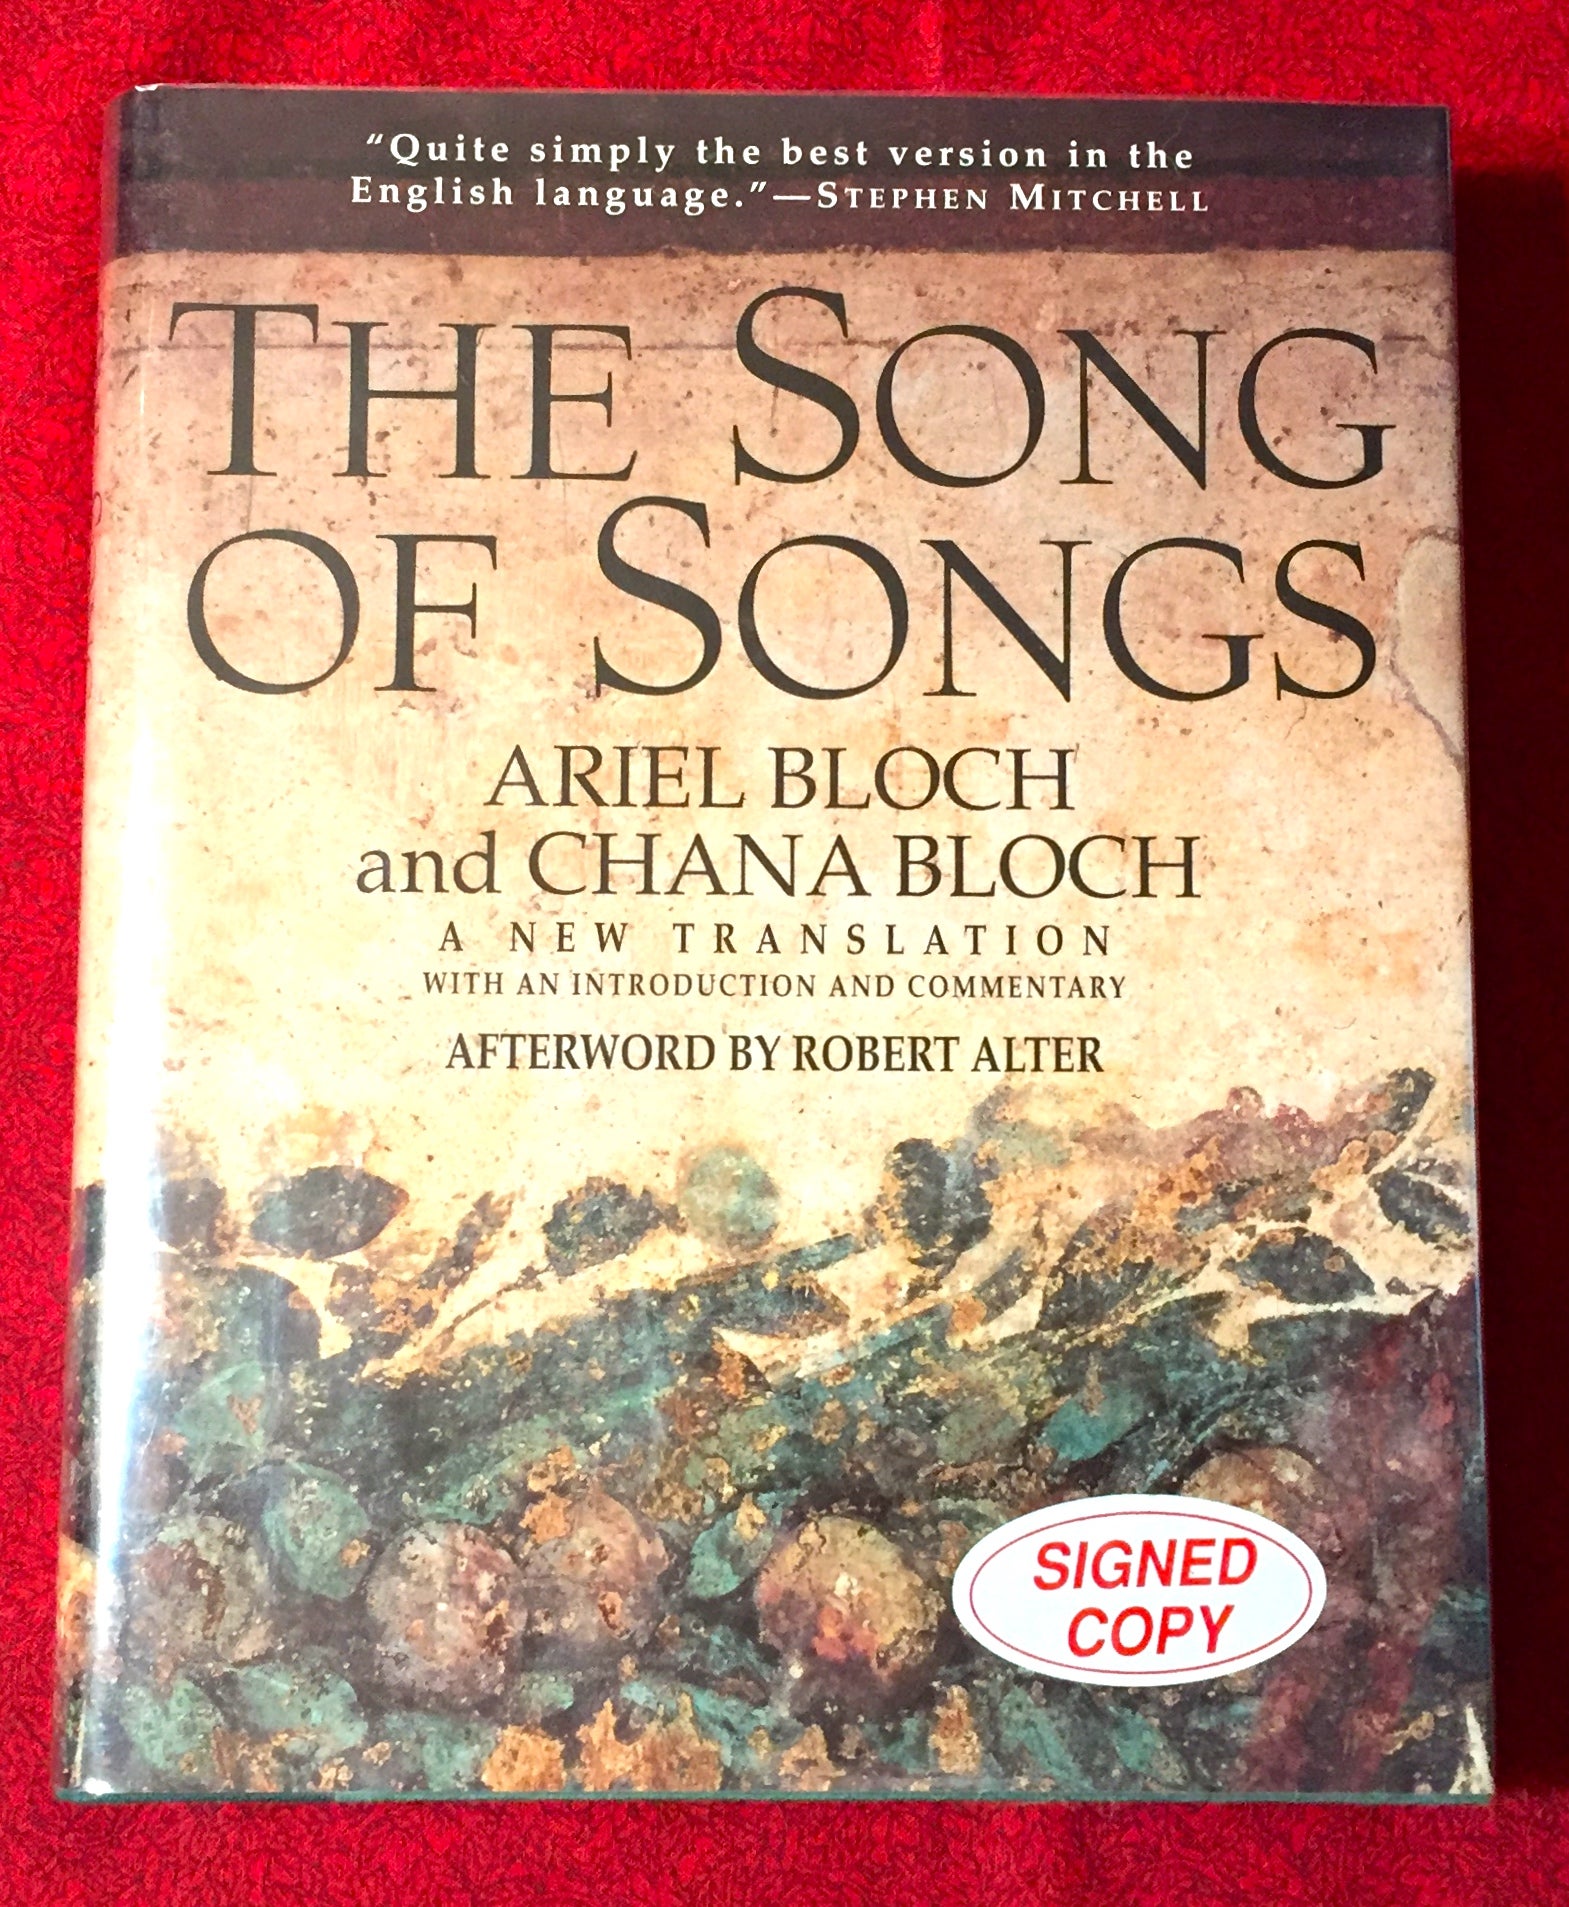 Afterword　OF　Robert　Commentary　by　A　Chana　and　an　Hebrew　Edition:　facing　Bloch　Translation　THE　English　New　Ariel　Introduction　with　SONG　Alter　SONGS;　Translation　Block,　First